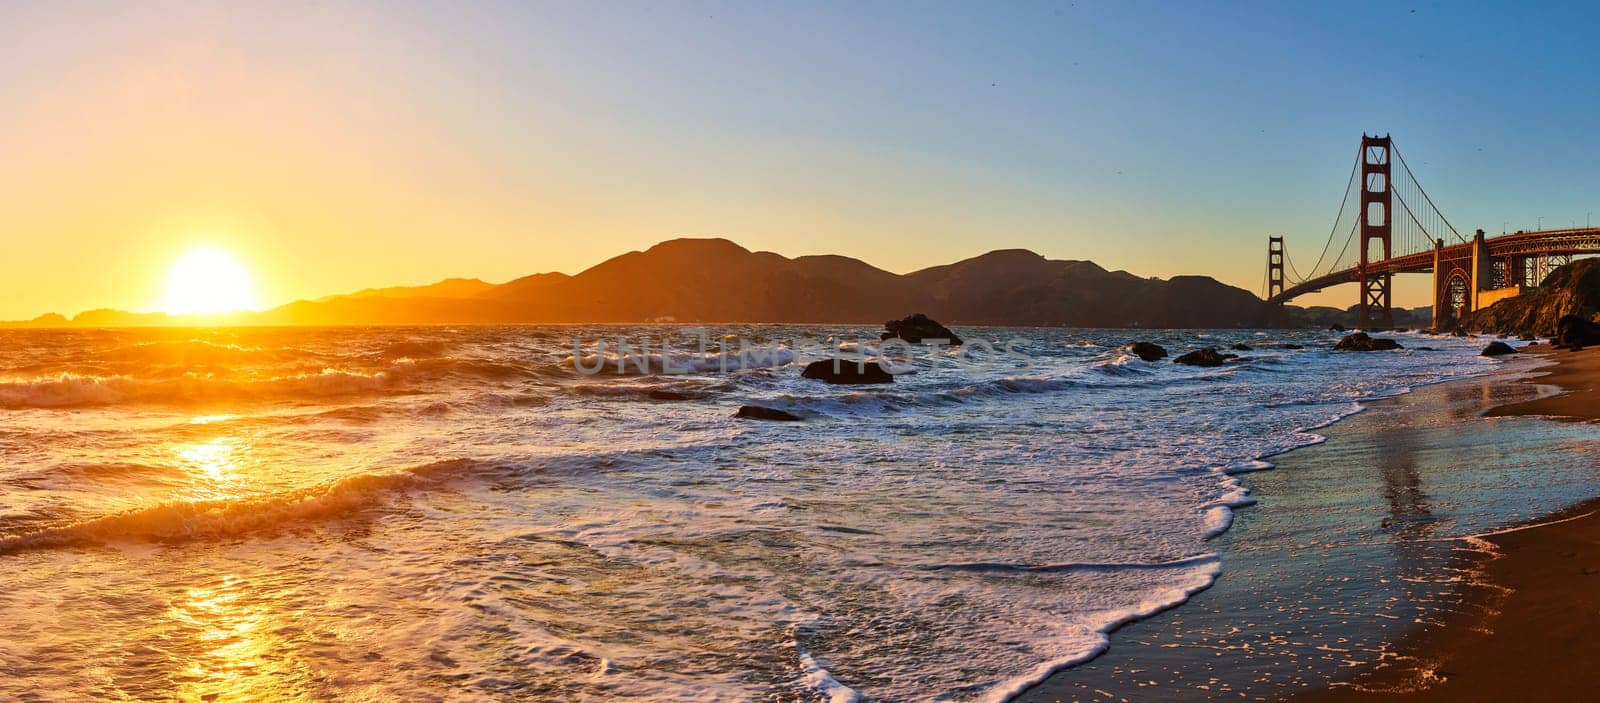 Image of Panorama sunset over waves against sandy shore and distant mountain with Golden Gate Bridge